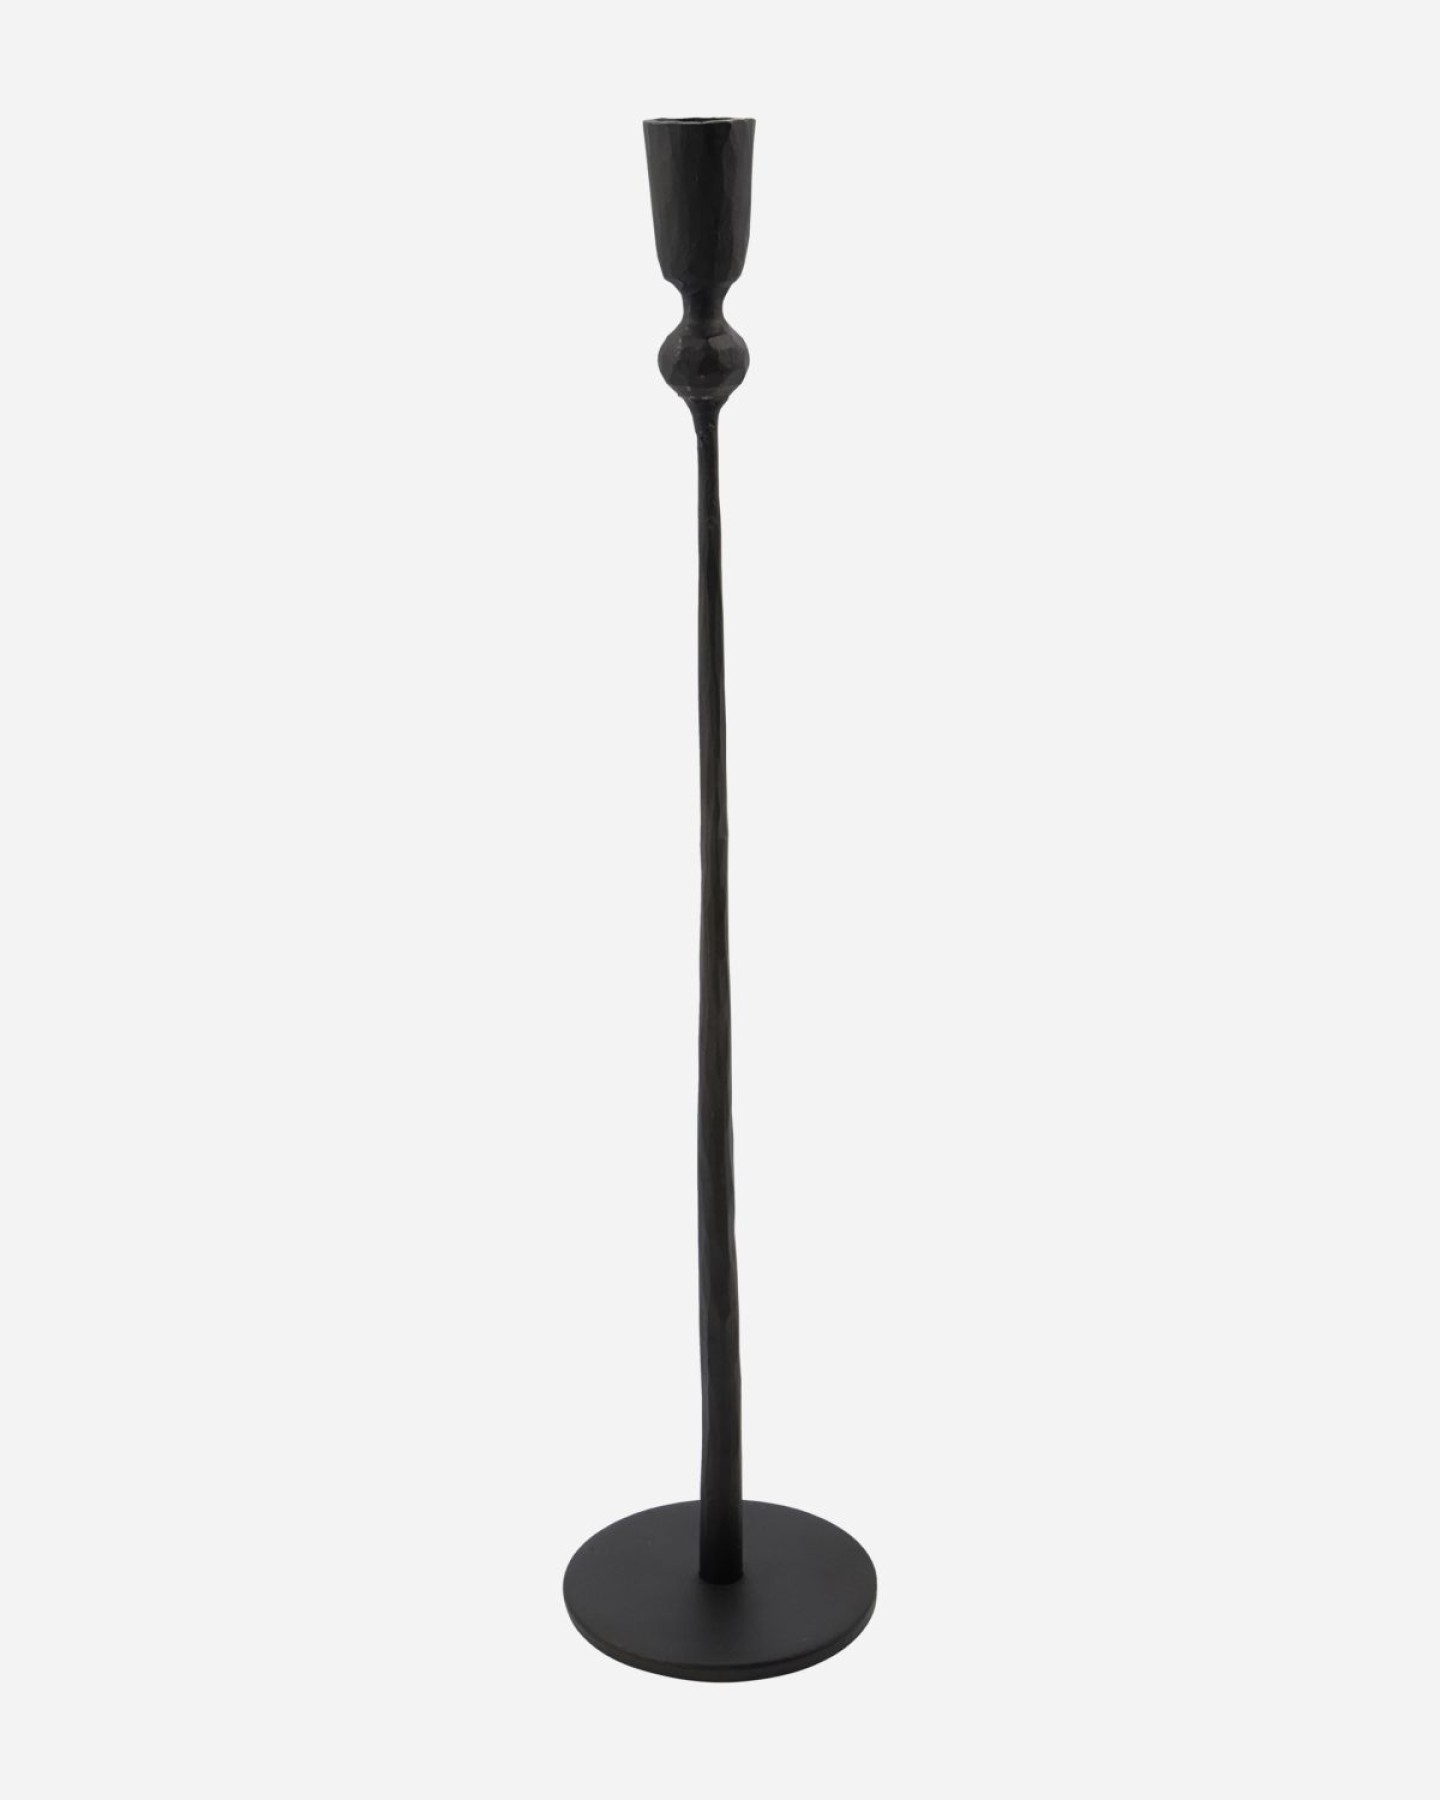 THE TRIVO CANDLE STAND